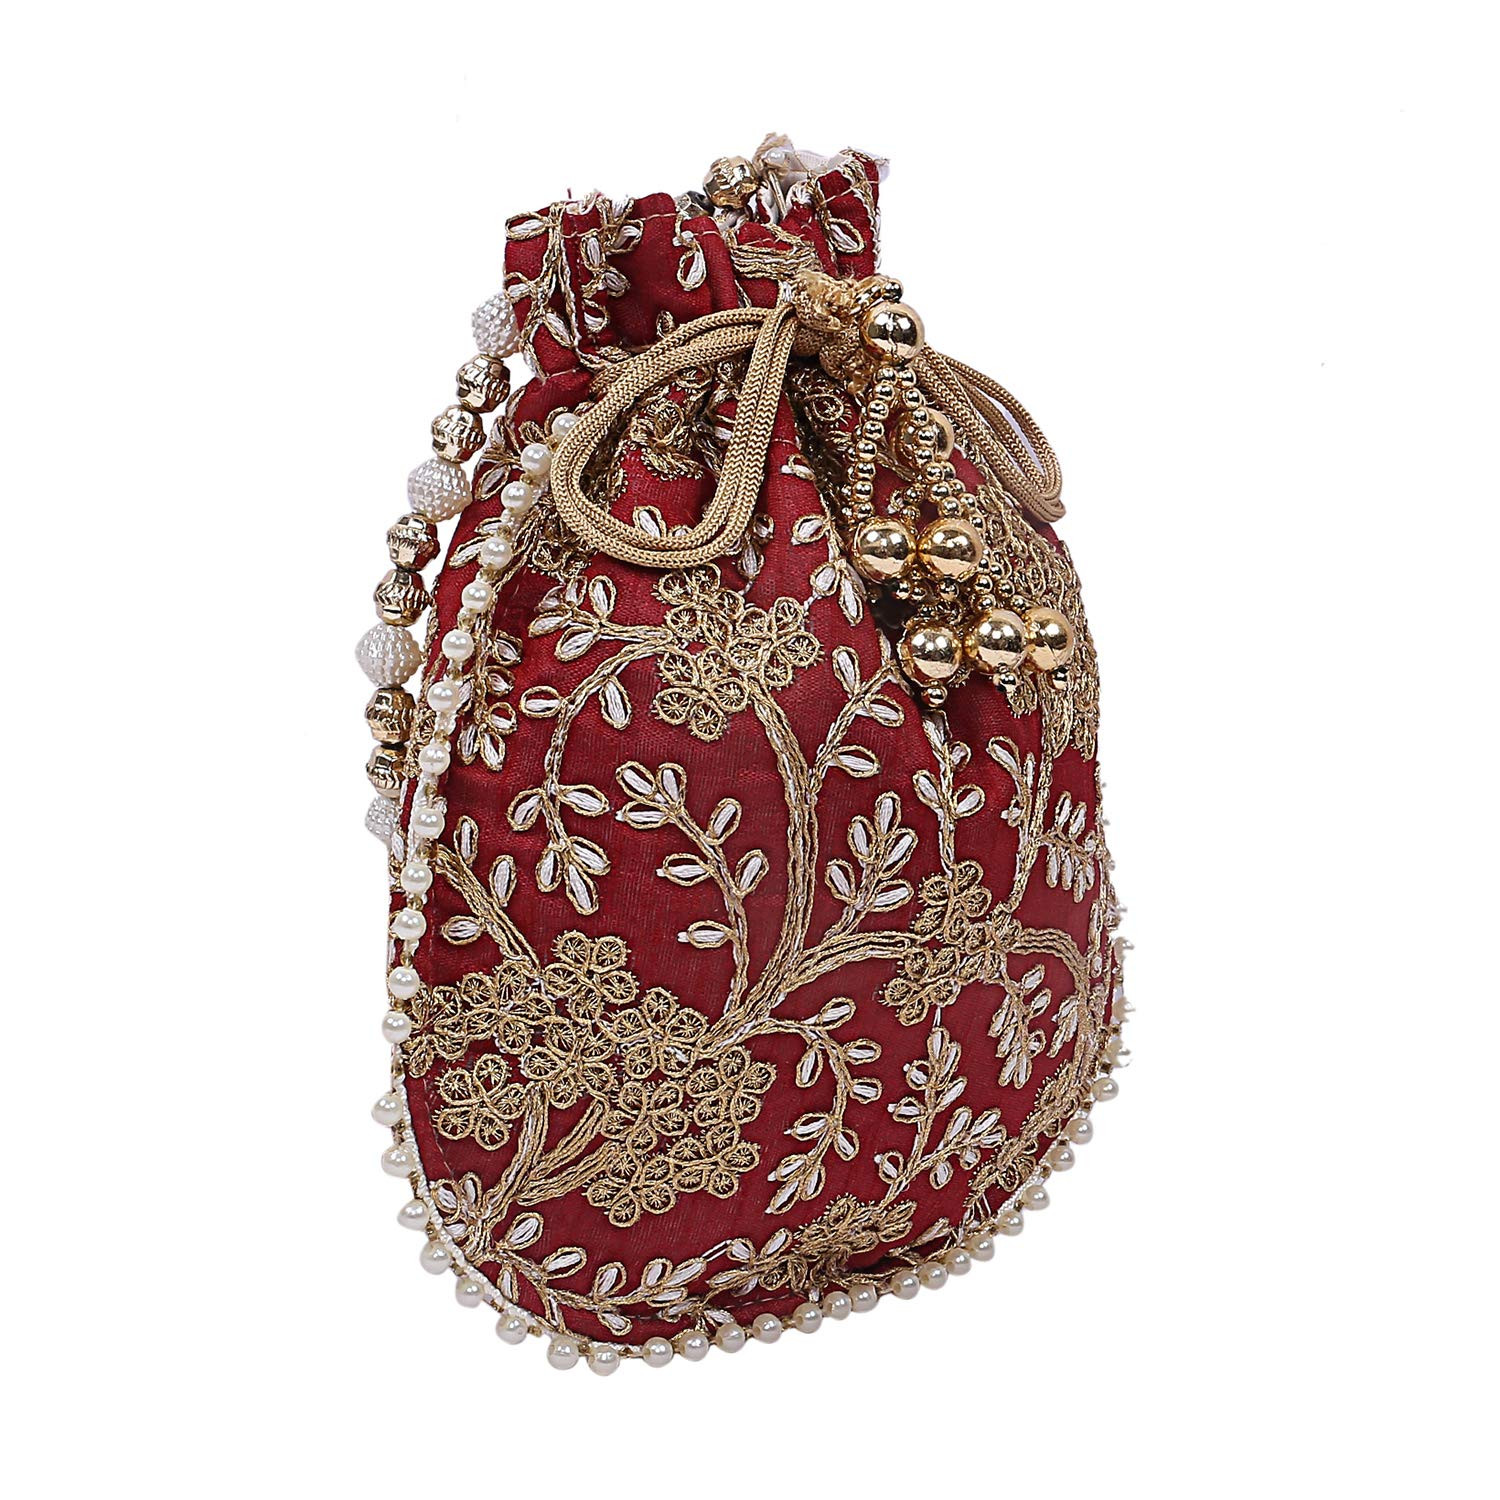 Kuber Industries Embroidery Drawstring Potli|Hand Purse With Gold Pearl Border & Handle For Woman,Girls Pack of 2 (Red & Maroon)